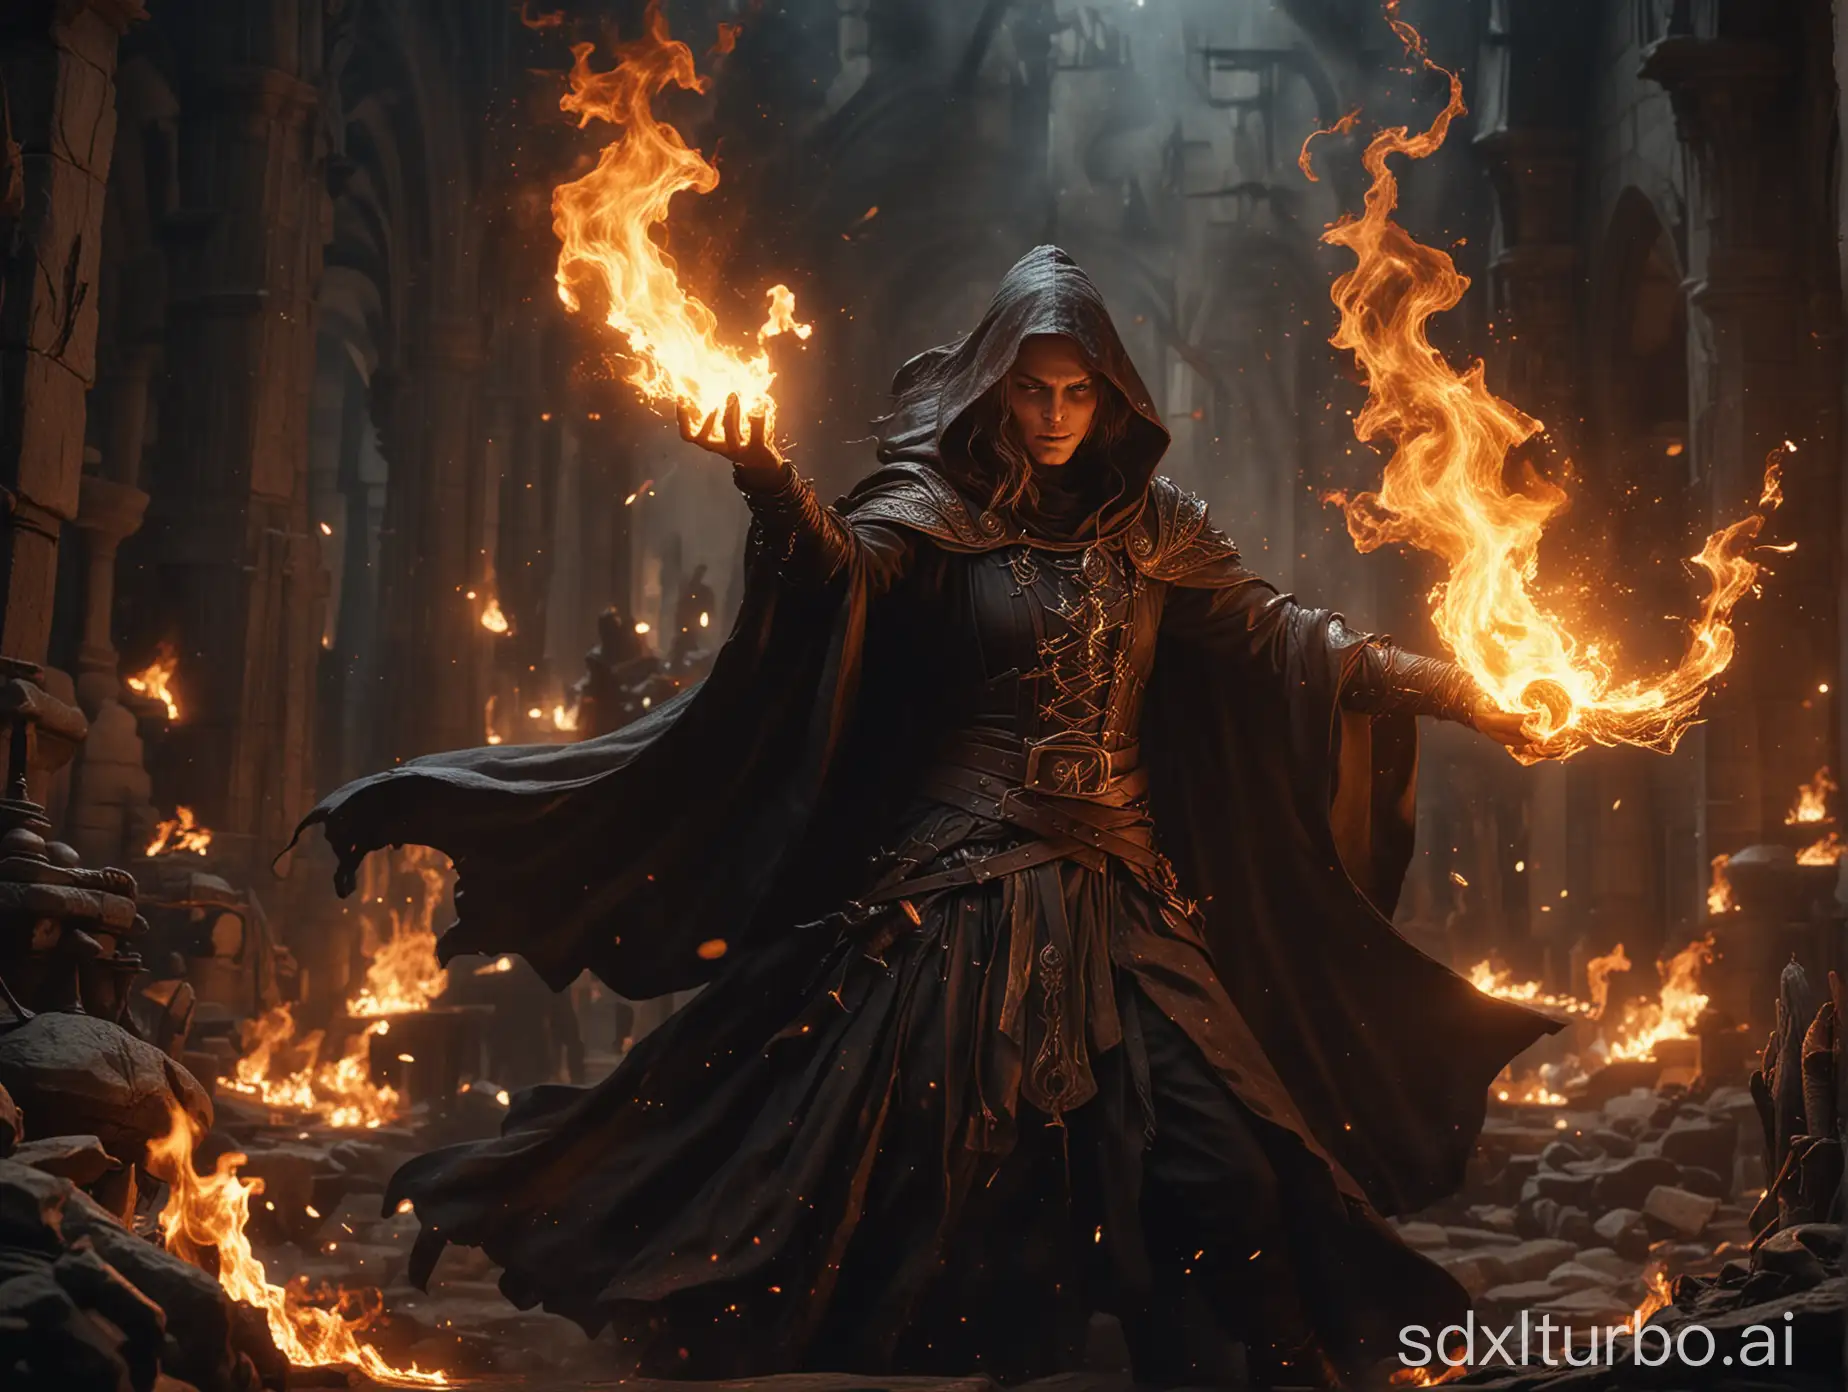 Epic-Battle-of-Dark-Sorcerer-and-Light-Herald-with-Flickering-Flames